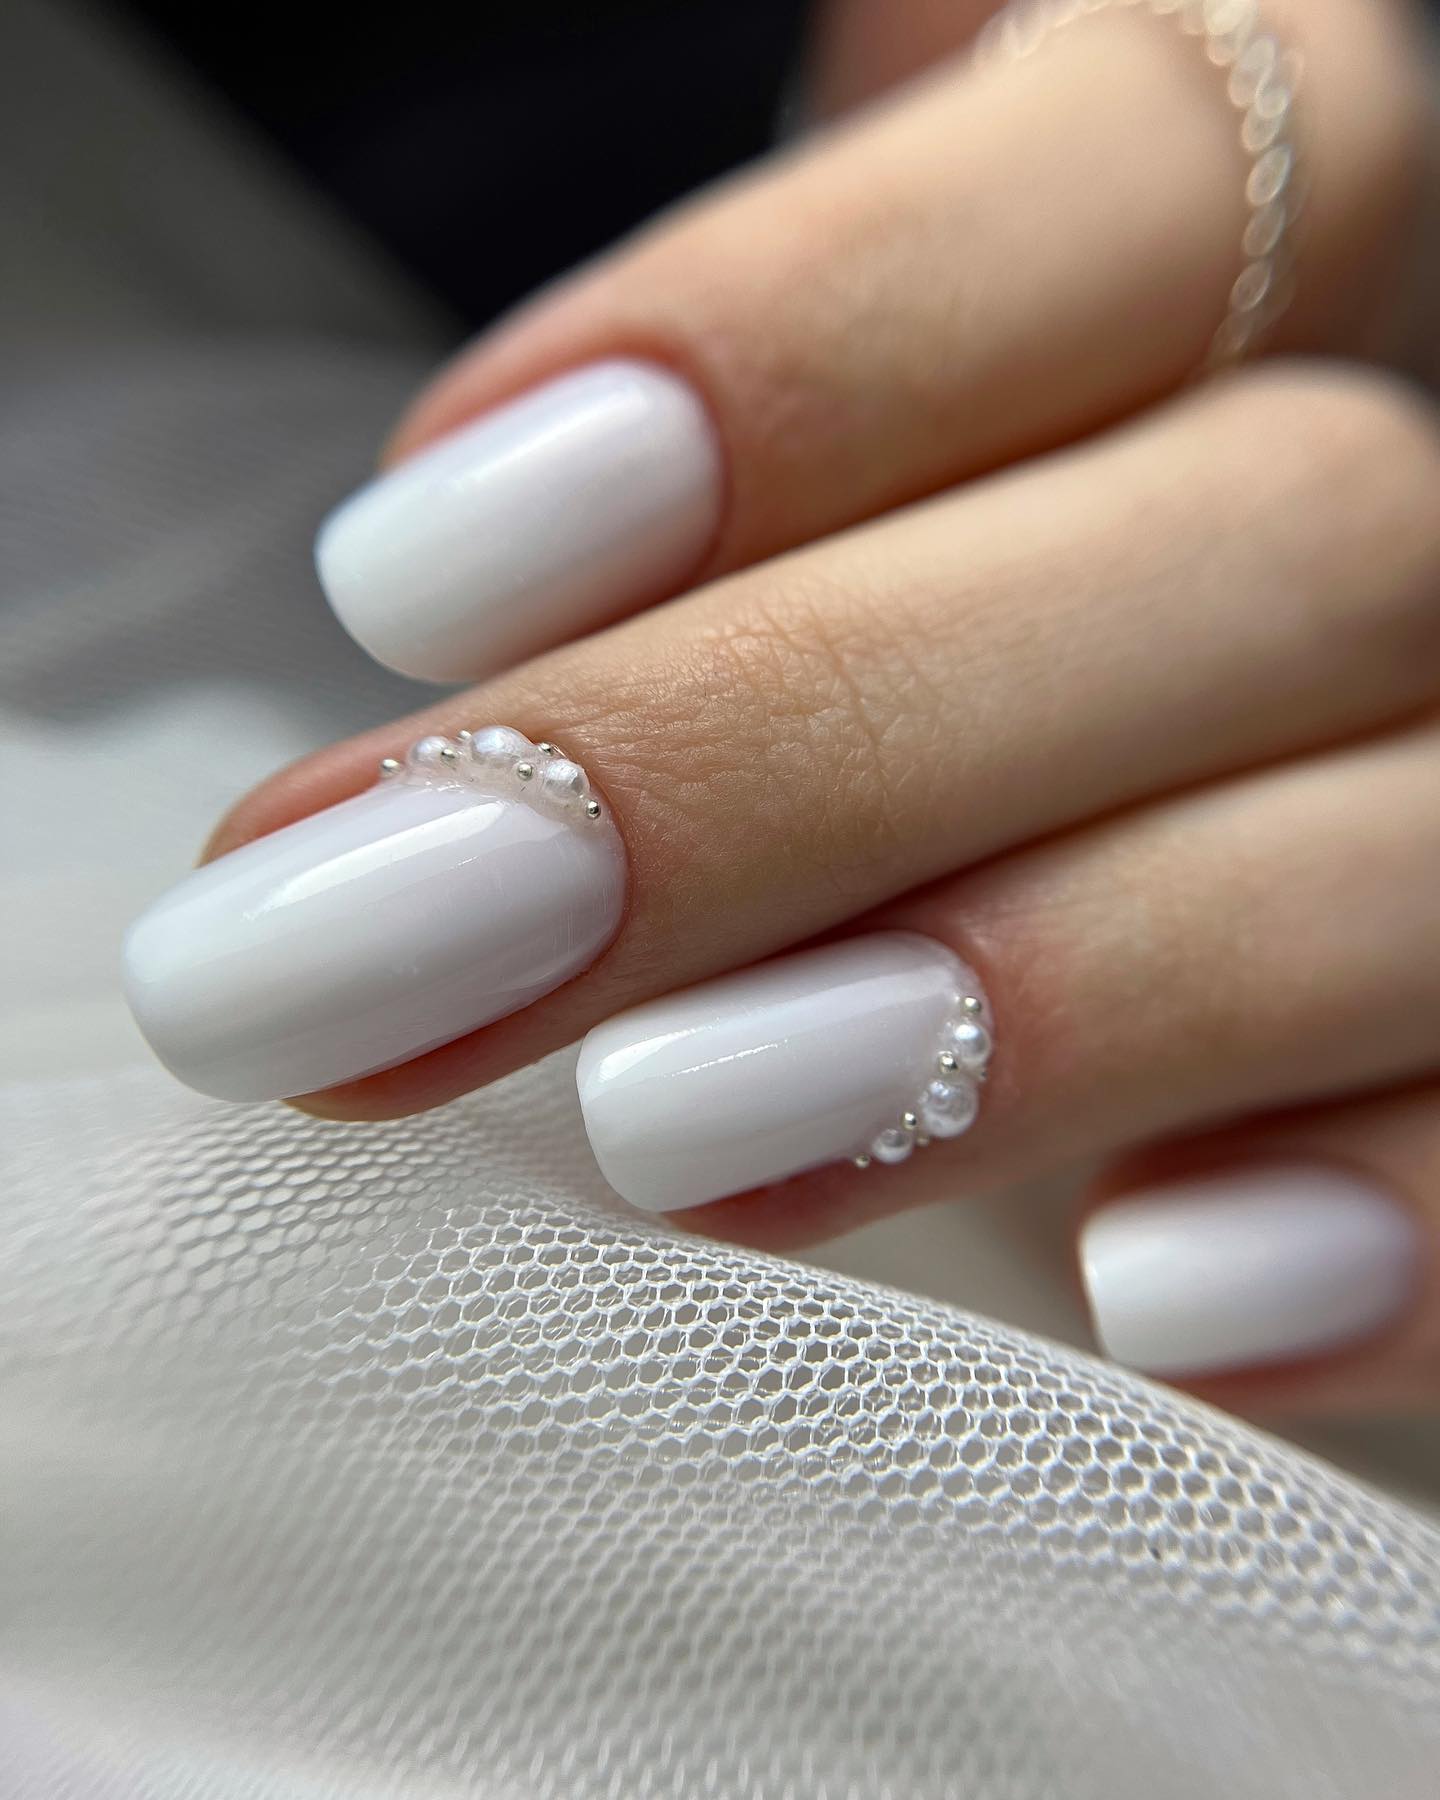 Pearls are one of the most preffered bridal trends of all time and they symbolize bridal purity. Because of its strong symbolism, we suggest you apply some pearls on your manicure as a nice detail.